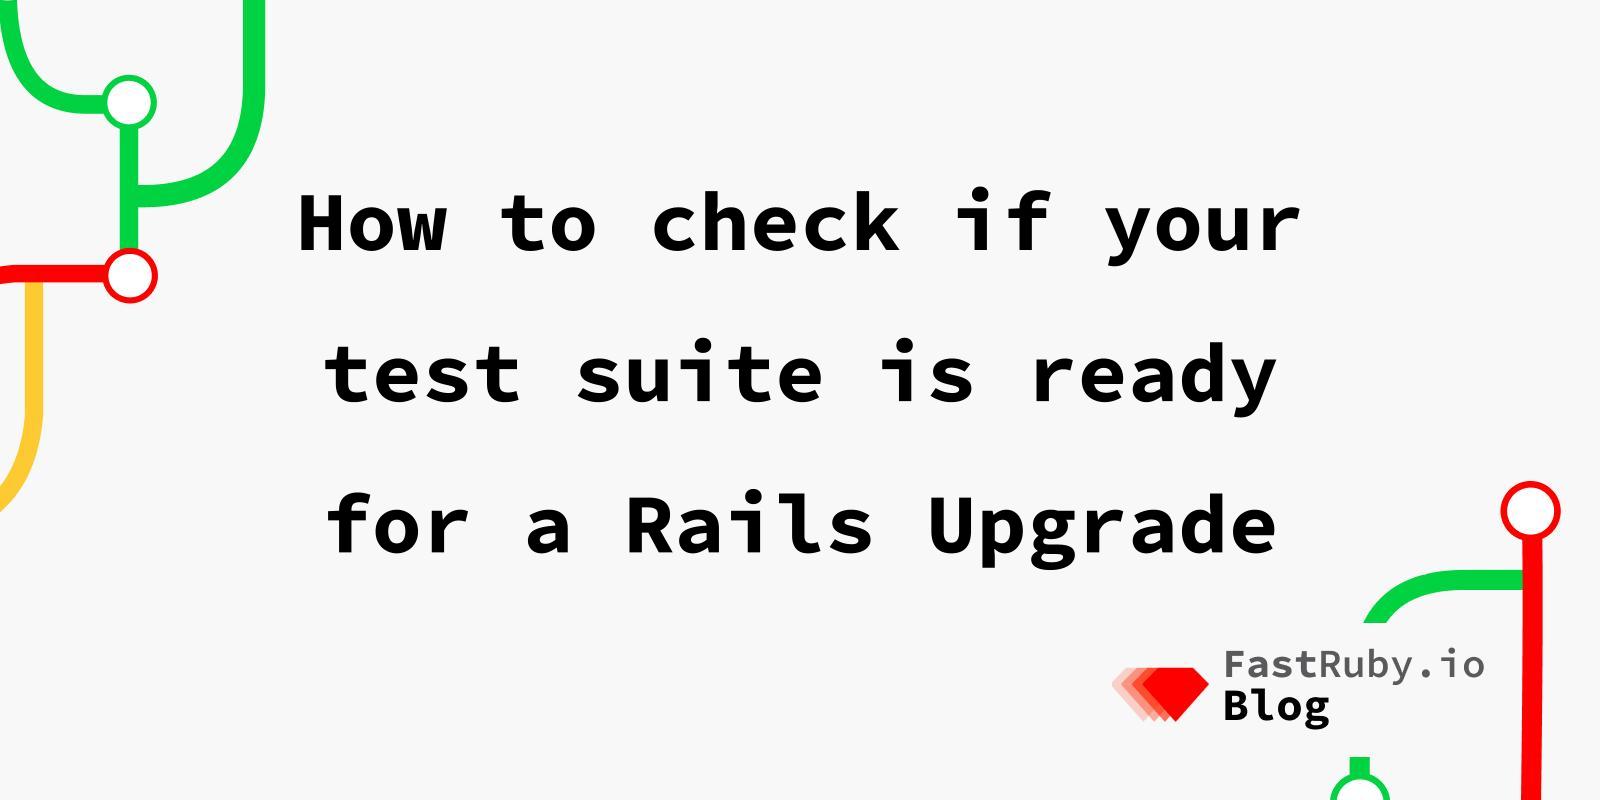 How to check if your test suite is ready for a Rails Upgrade